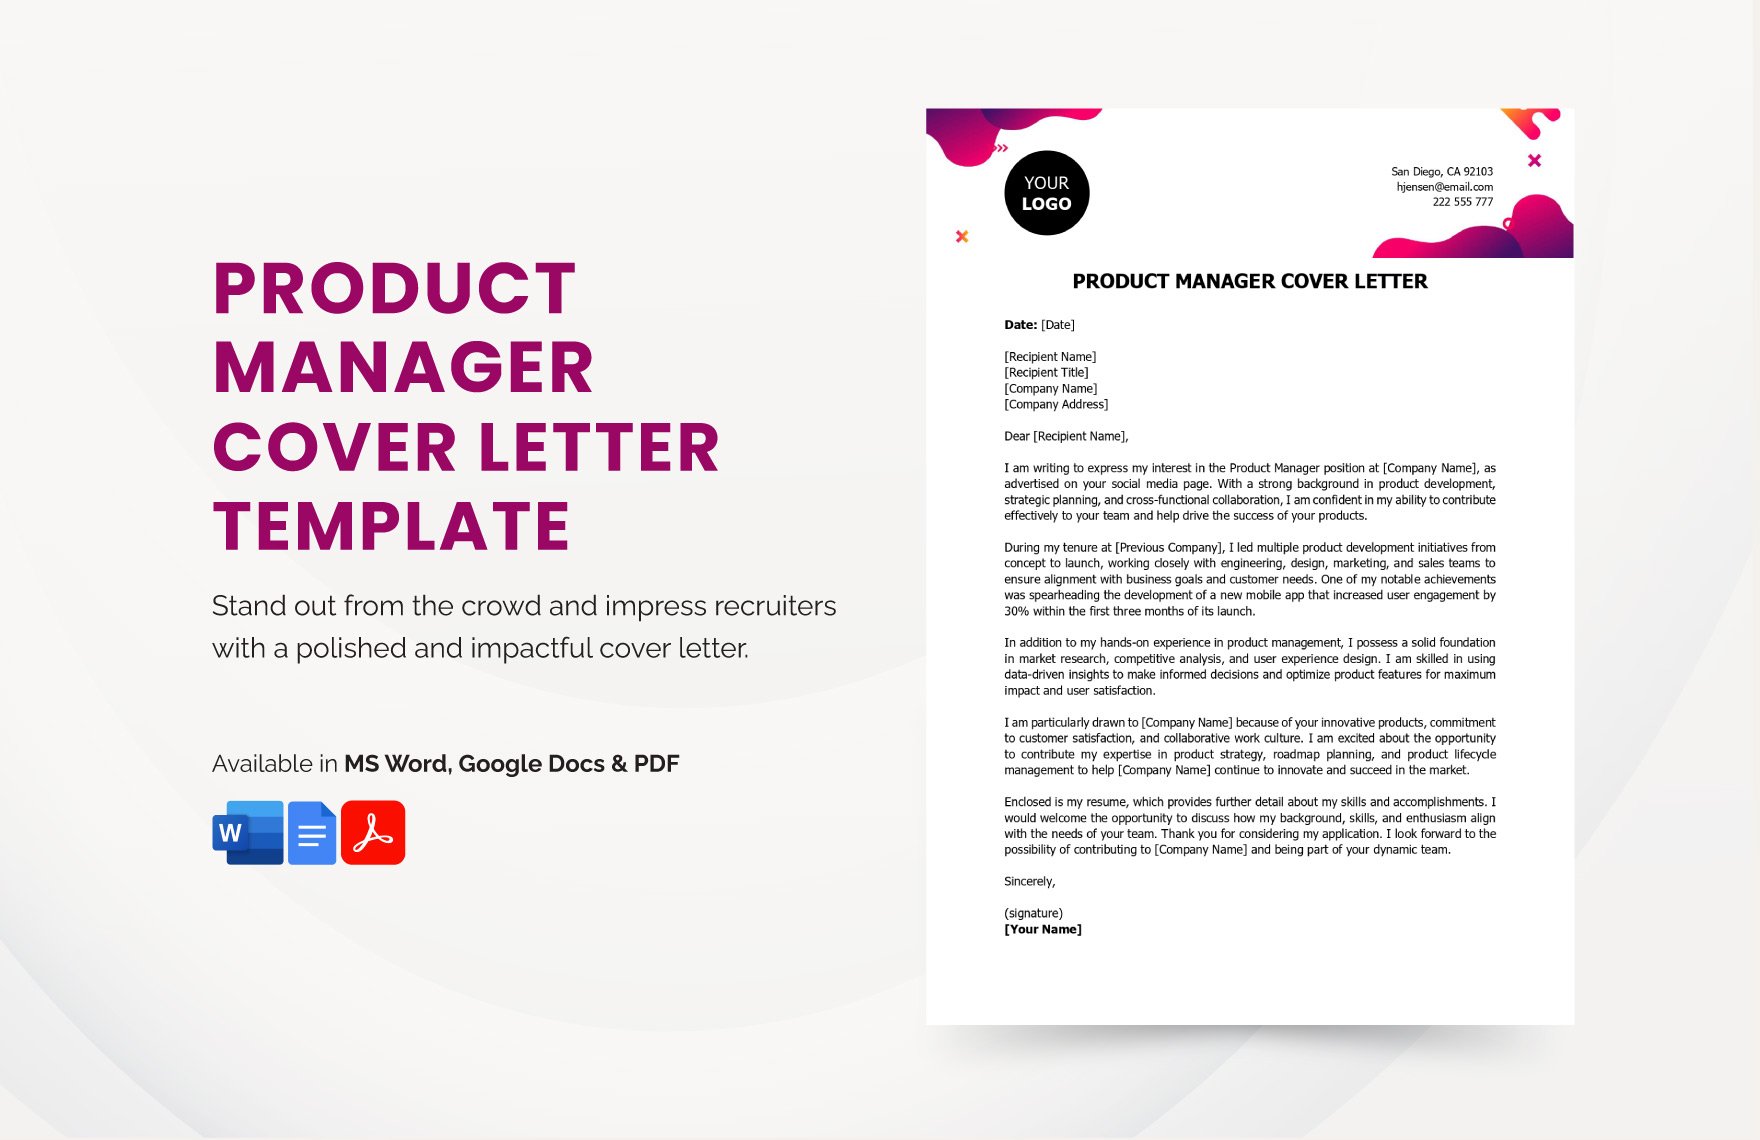 Product Manager Cover Letter Template in Word, Google Docs, PDF